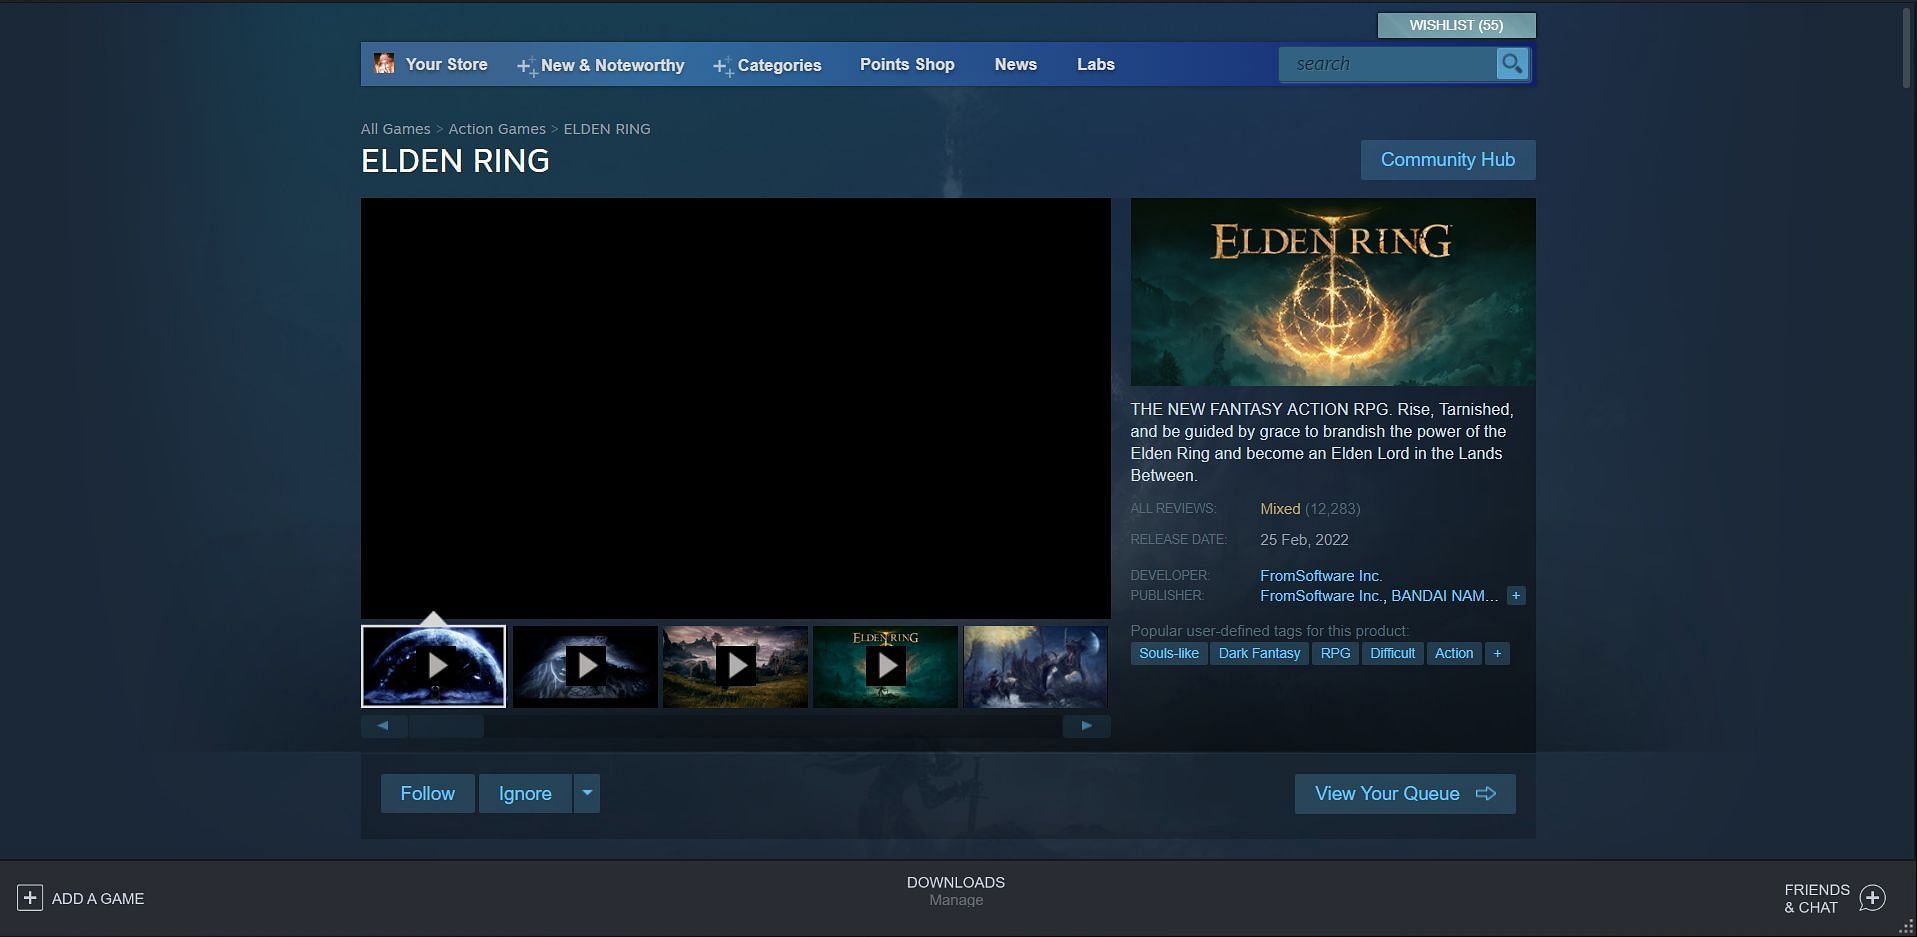 Elden Ring becomes 7th most played game in Steam's history despite getting  mixed reviews from players